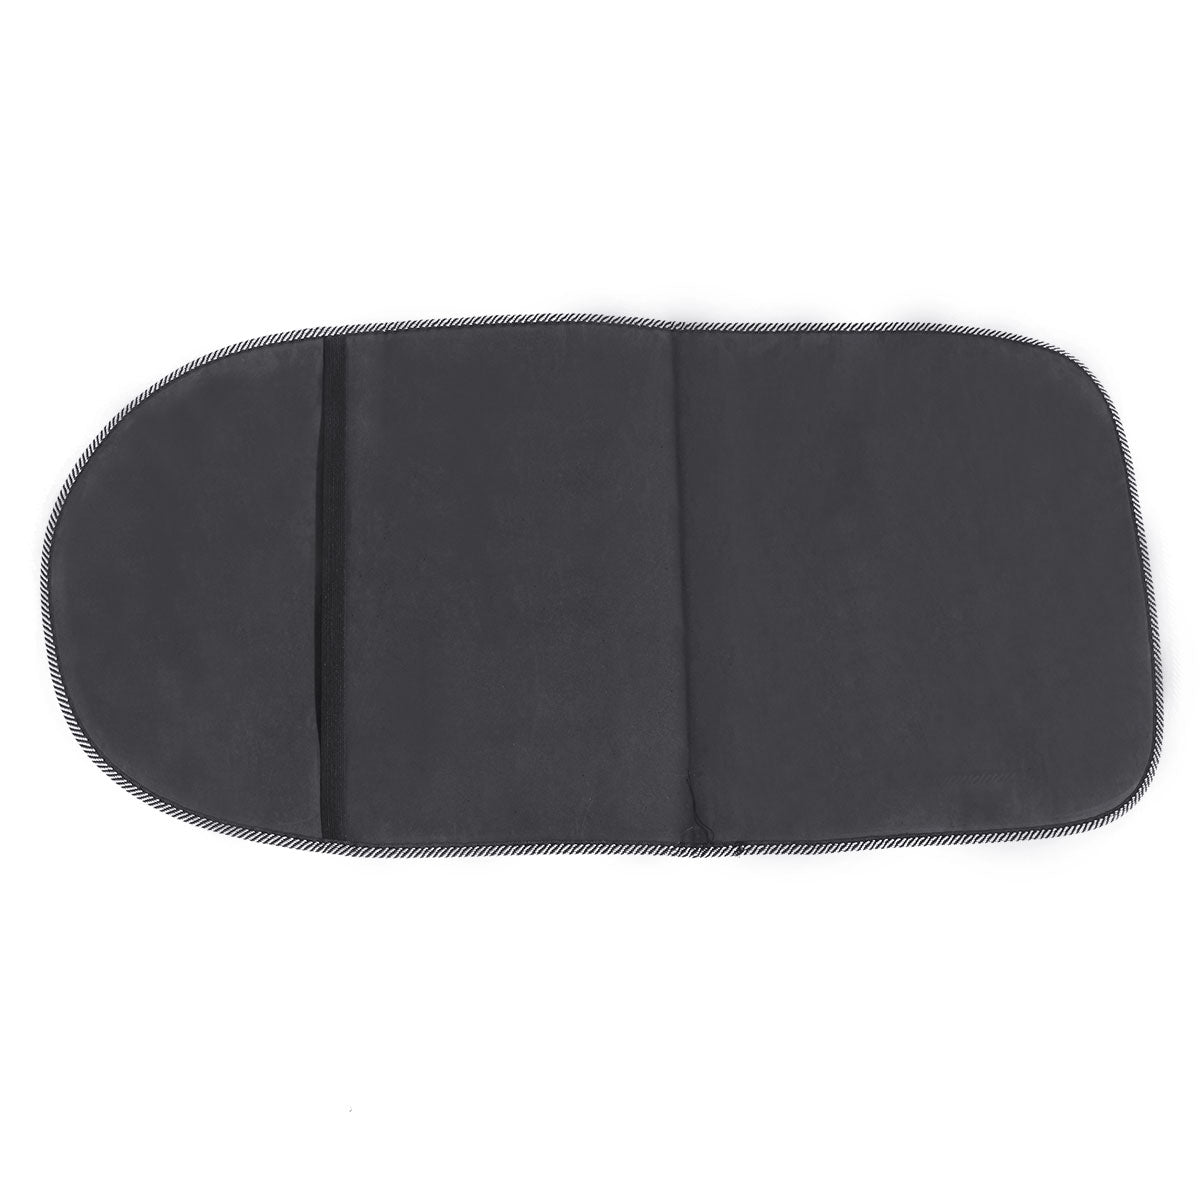 Dark Slate Gray Universal Breathable Fabric Seat Cover Mat Comfortable Cushion For Car Van Truck Office Home